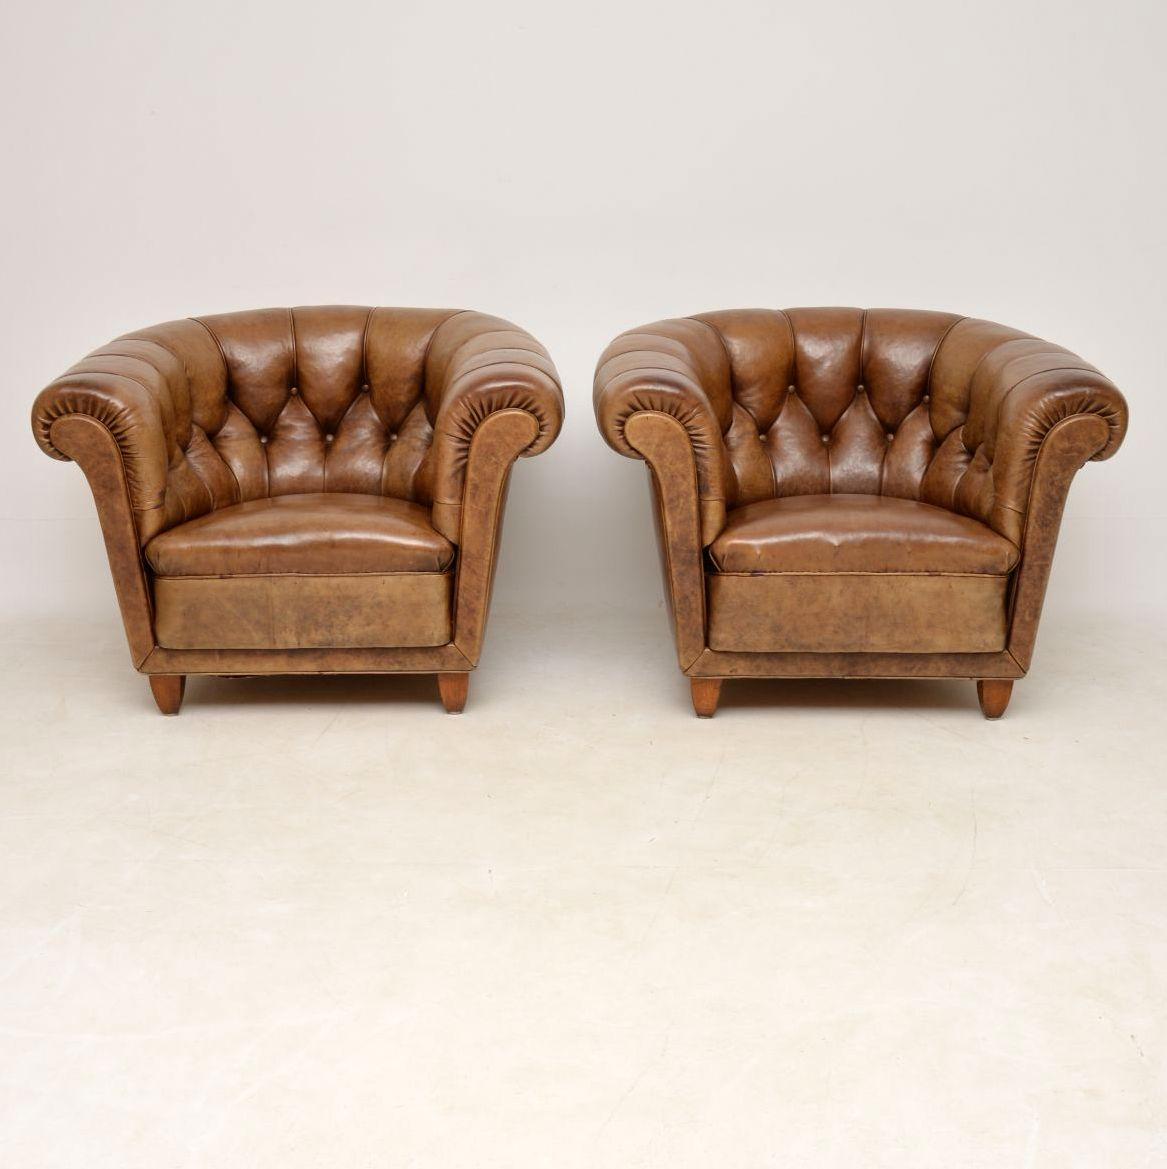 This pair of antique Swedish leather Chesterfield armchairs are absolutely stunning in both design and color. The leather is all original and in good condition. There is on small bit of damage on one of the seats, which has been professionally